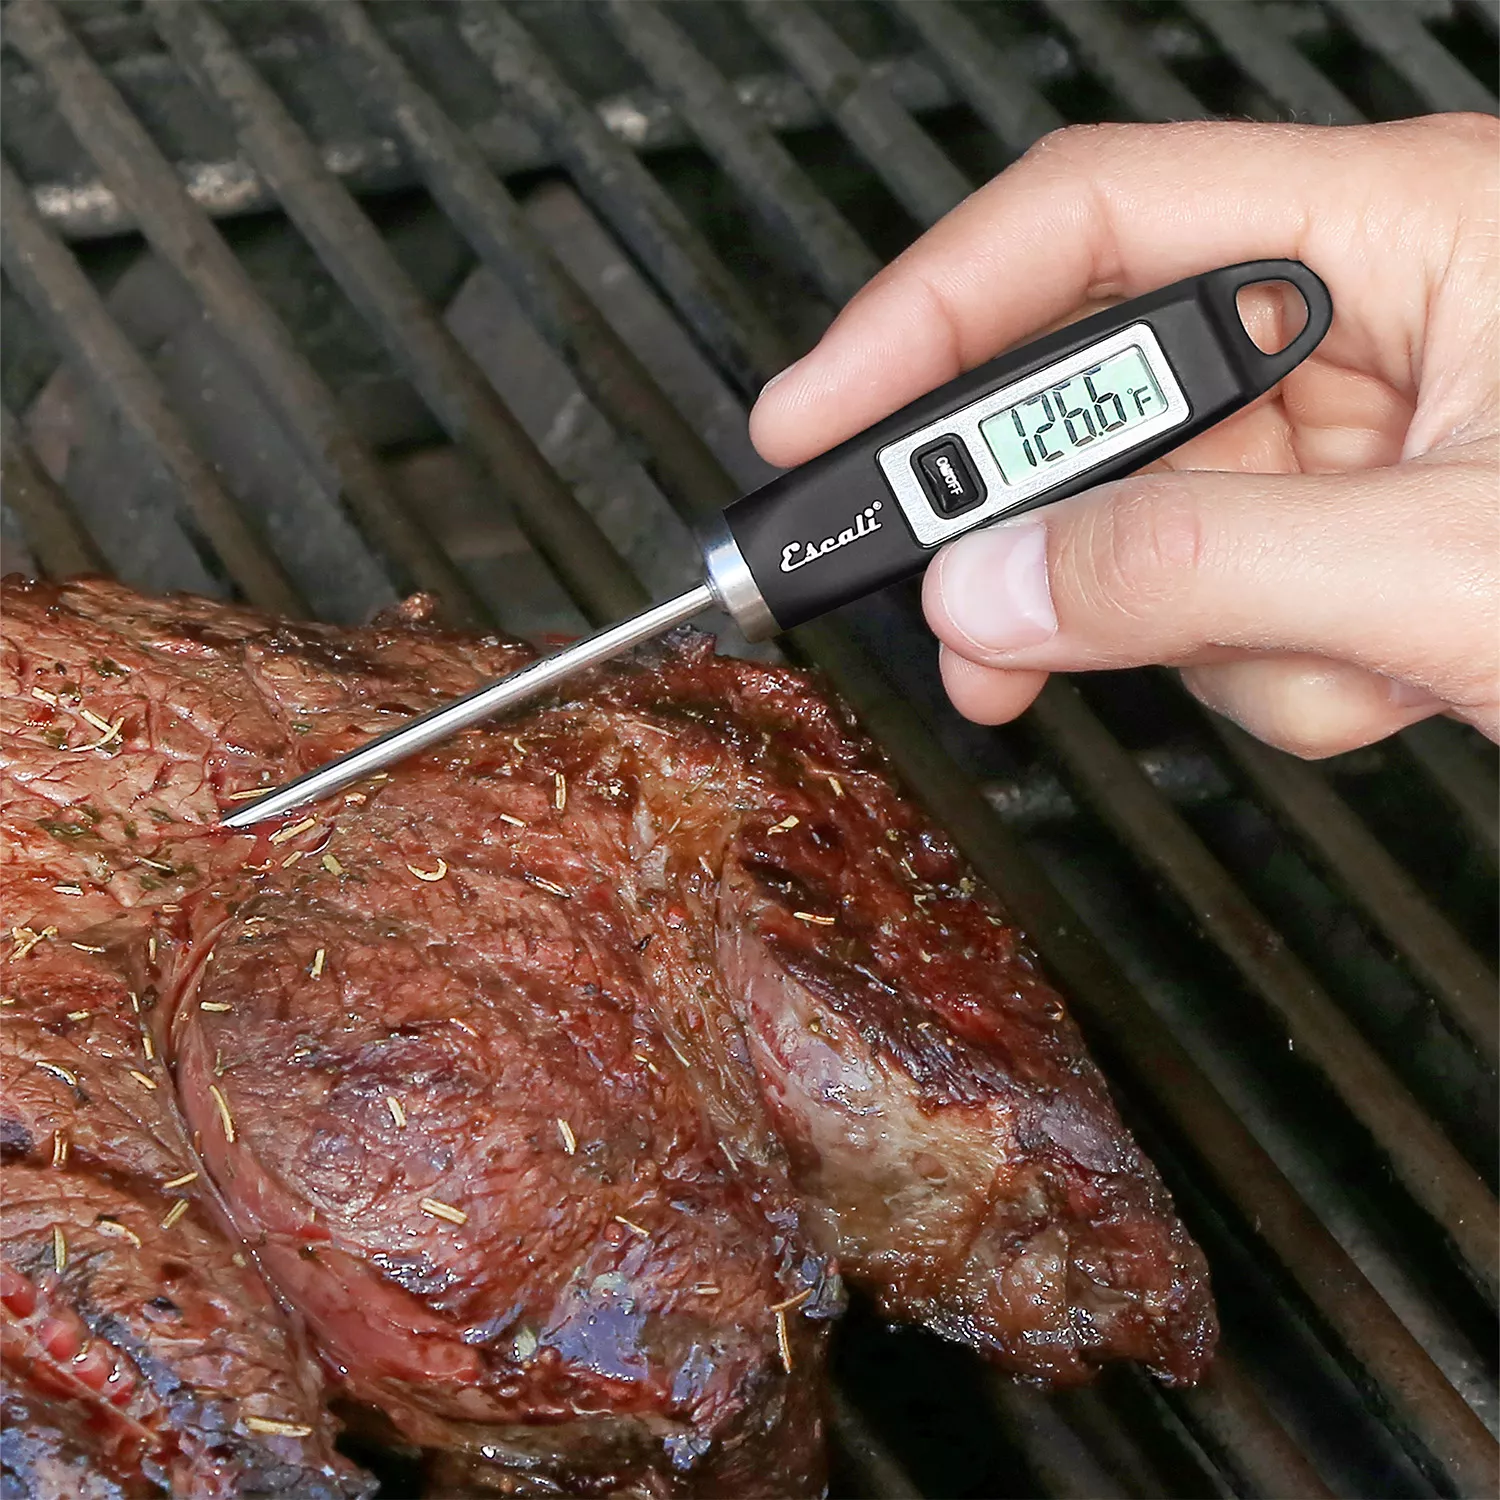 Meat Thermometers For Grilling, Meat Thermometer Digital, Meat Thermometer,  Digital Meat Thermometer With Probe, Waterproof Kitchen Instant Read Food  Thermometer For Cooking Baking Liquids Candy Grilling Bbq Air Fryer, Kitchen  Accessaries 